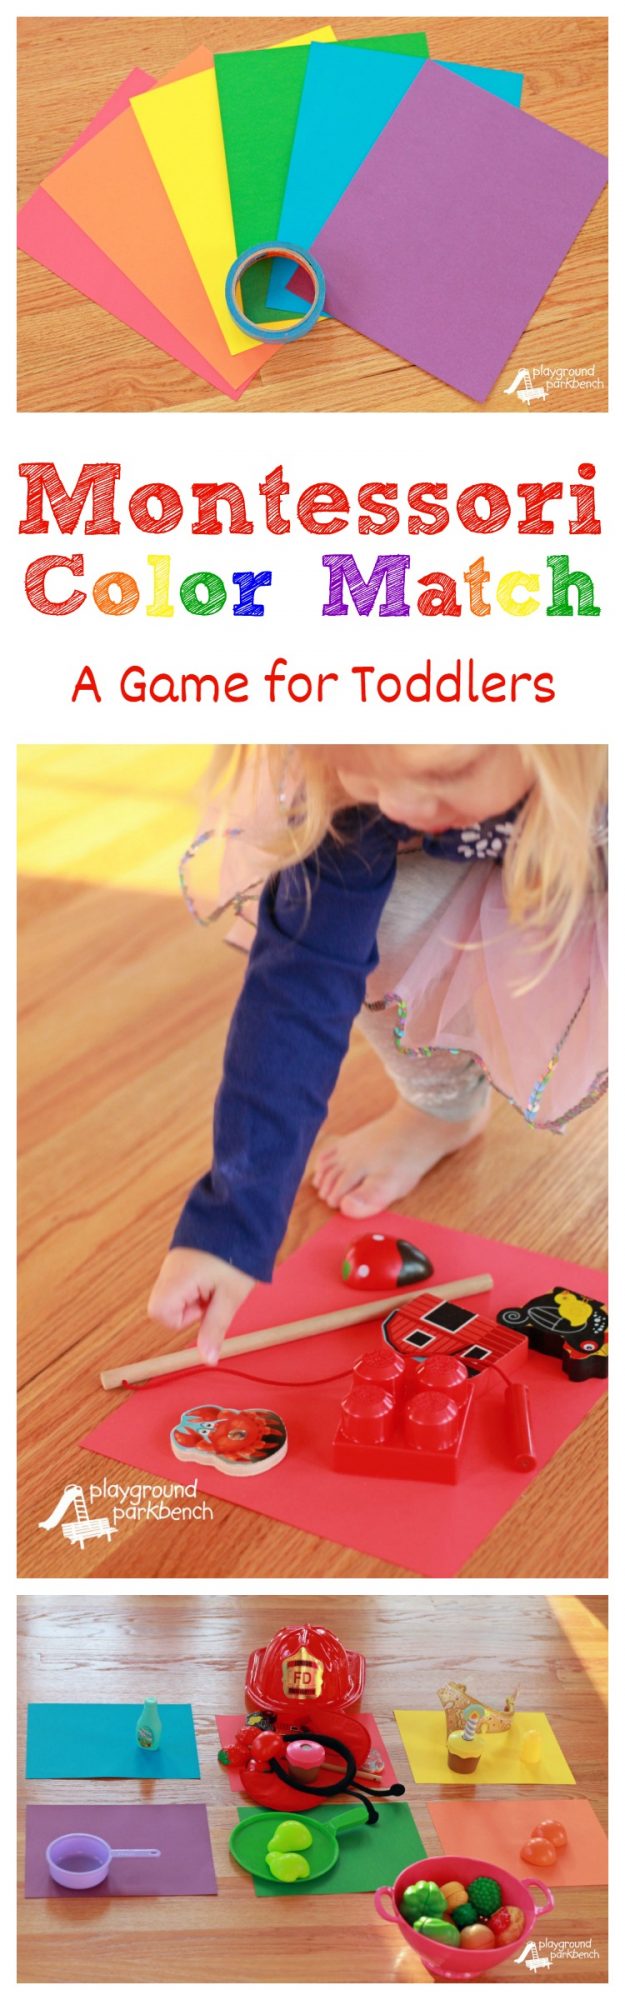 Montessori Color Match - An Easy Game for Toddlers